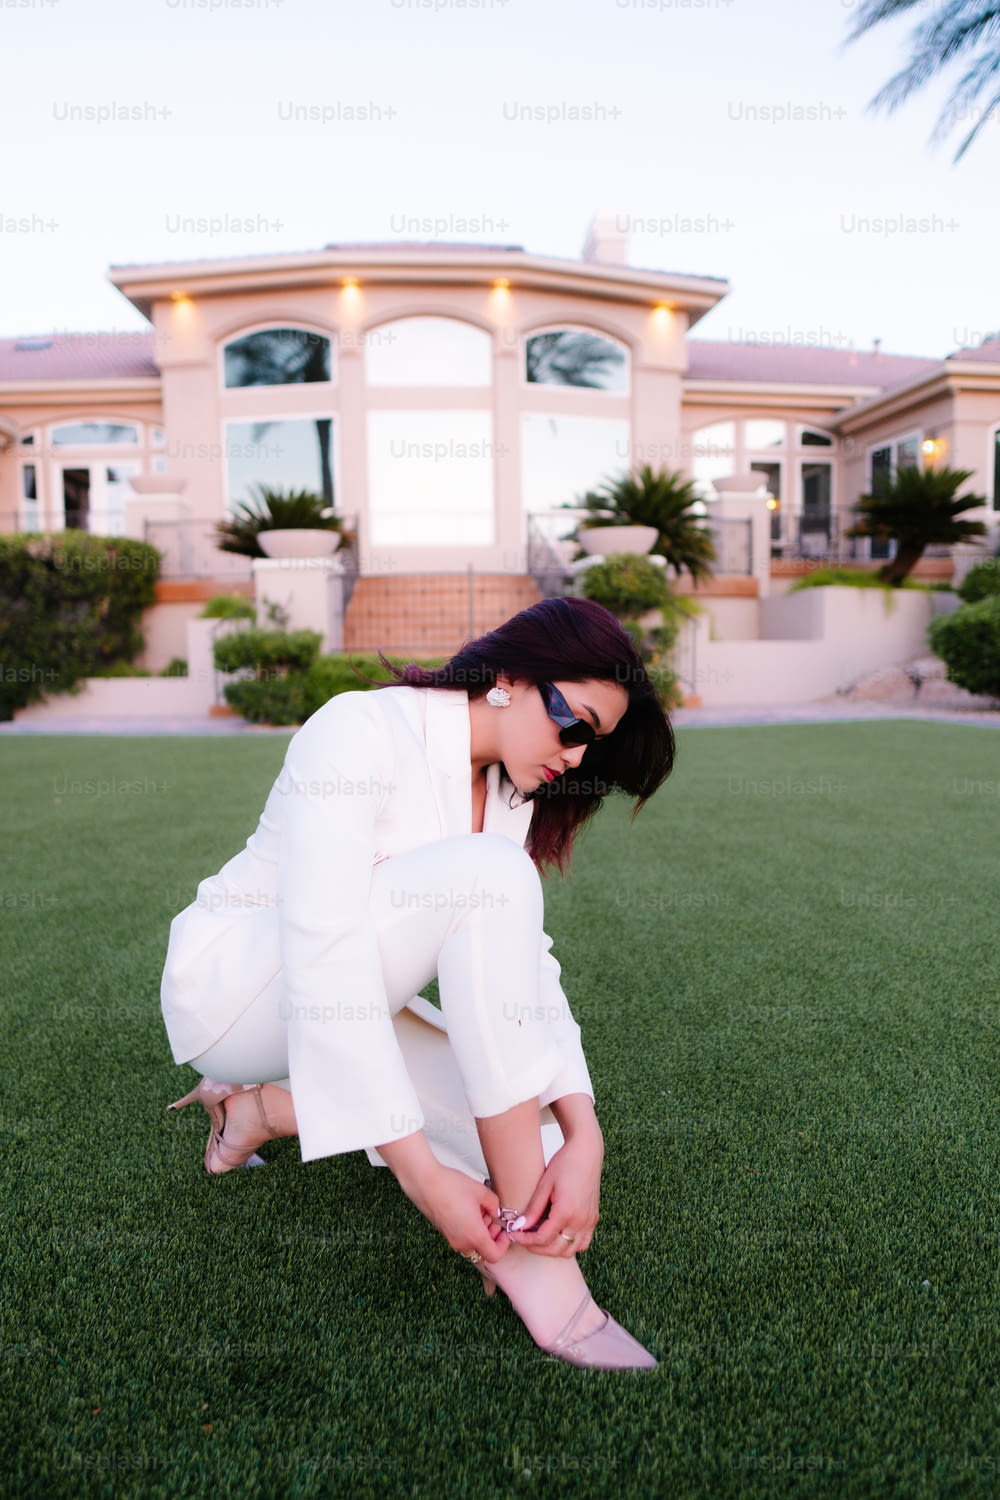 a woman in a white suit kneeling on the grass